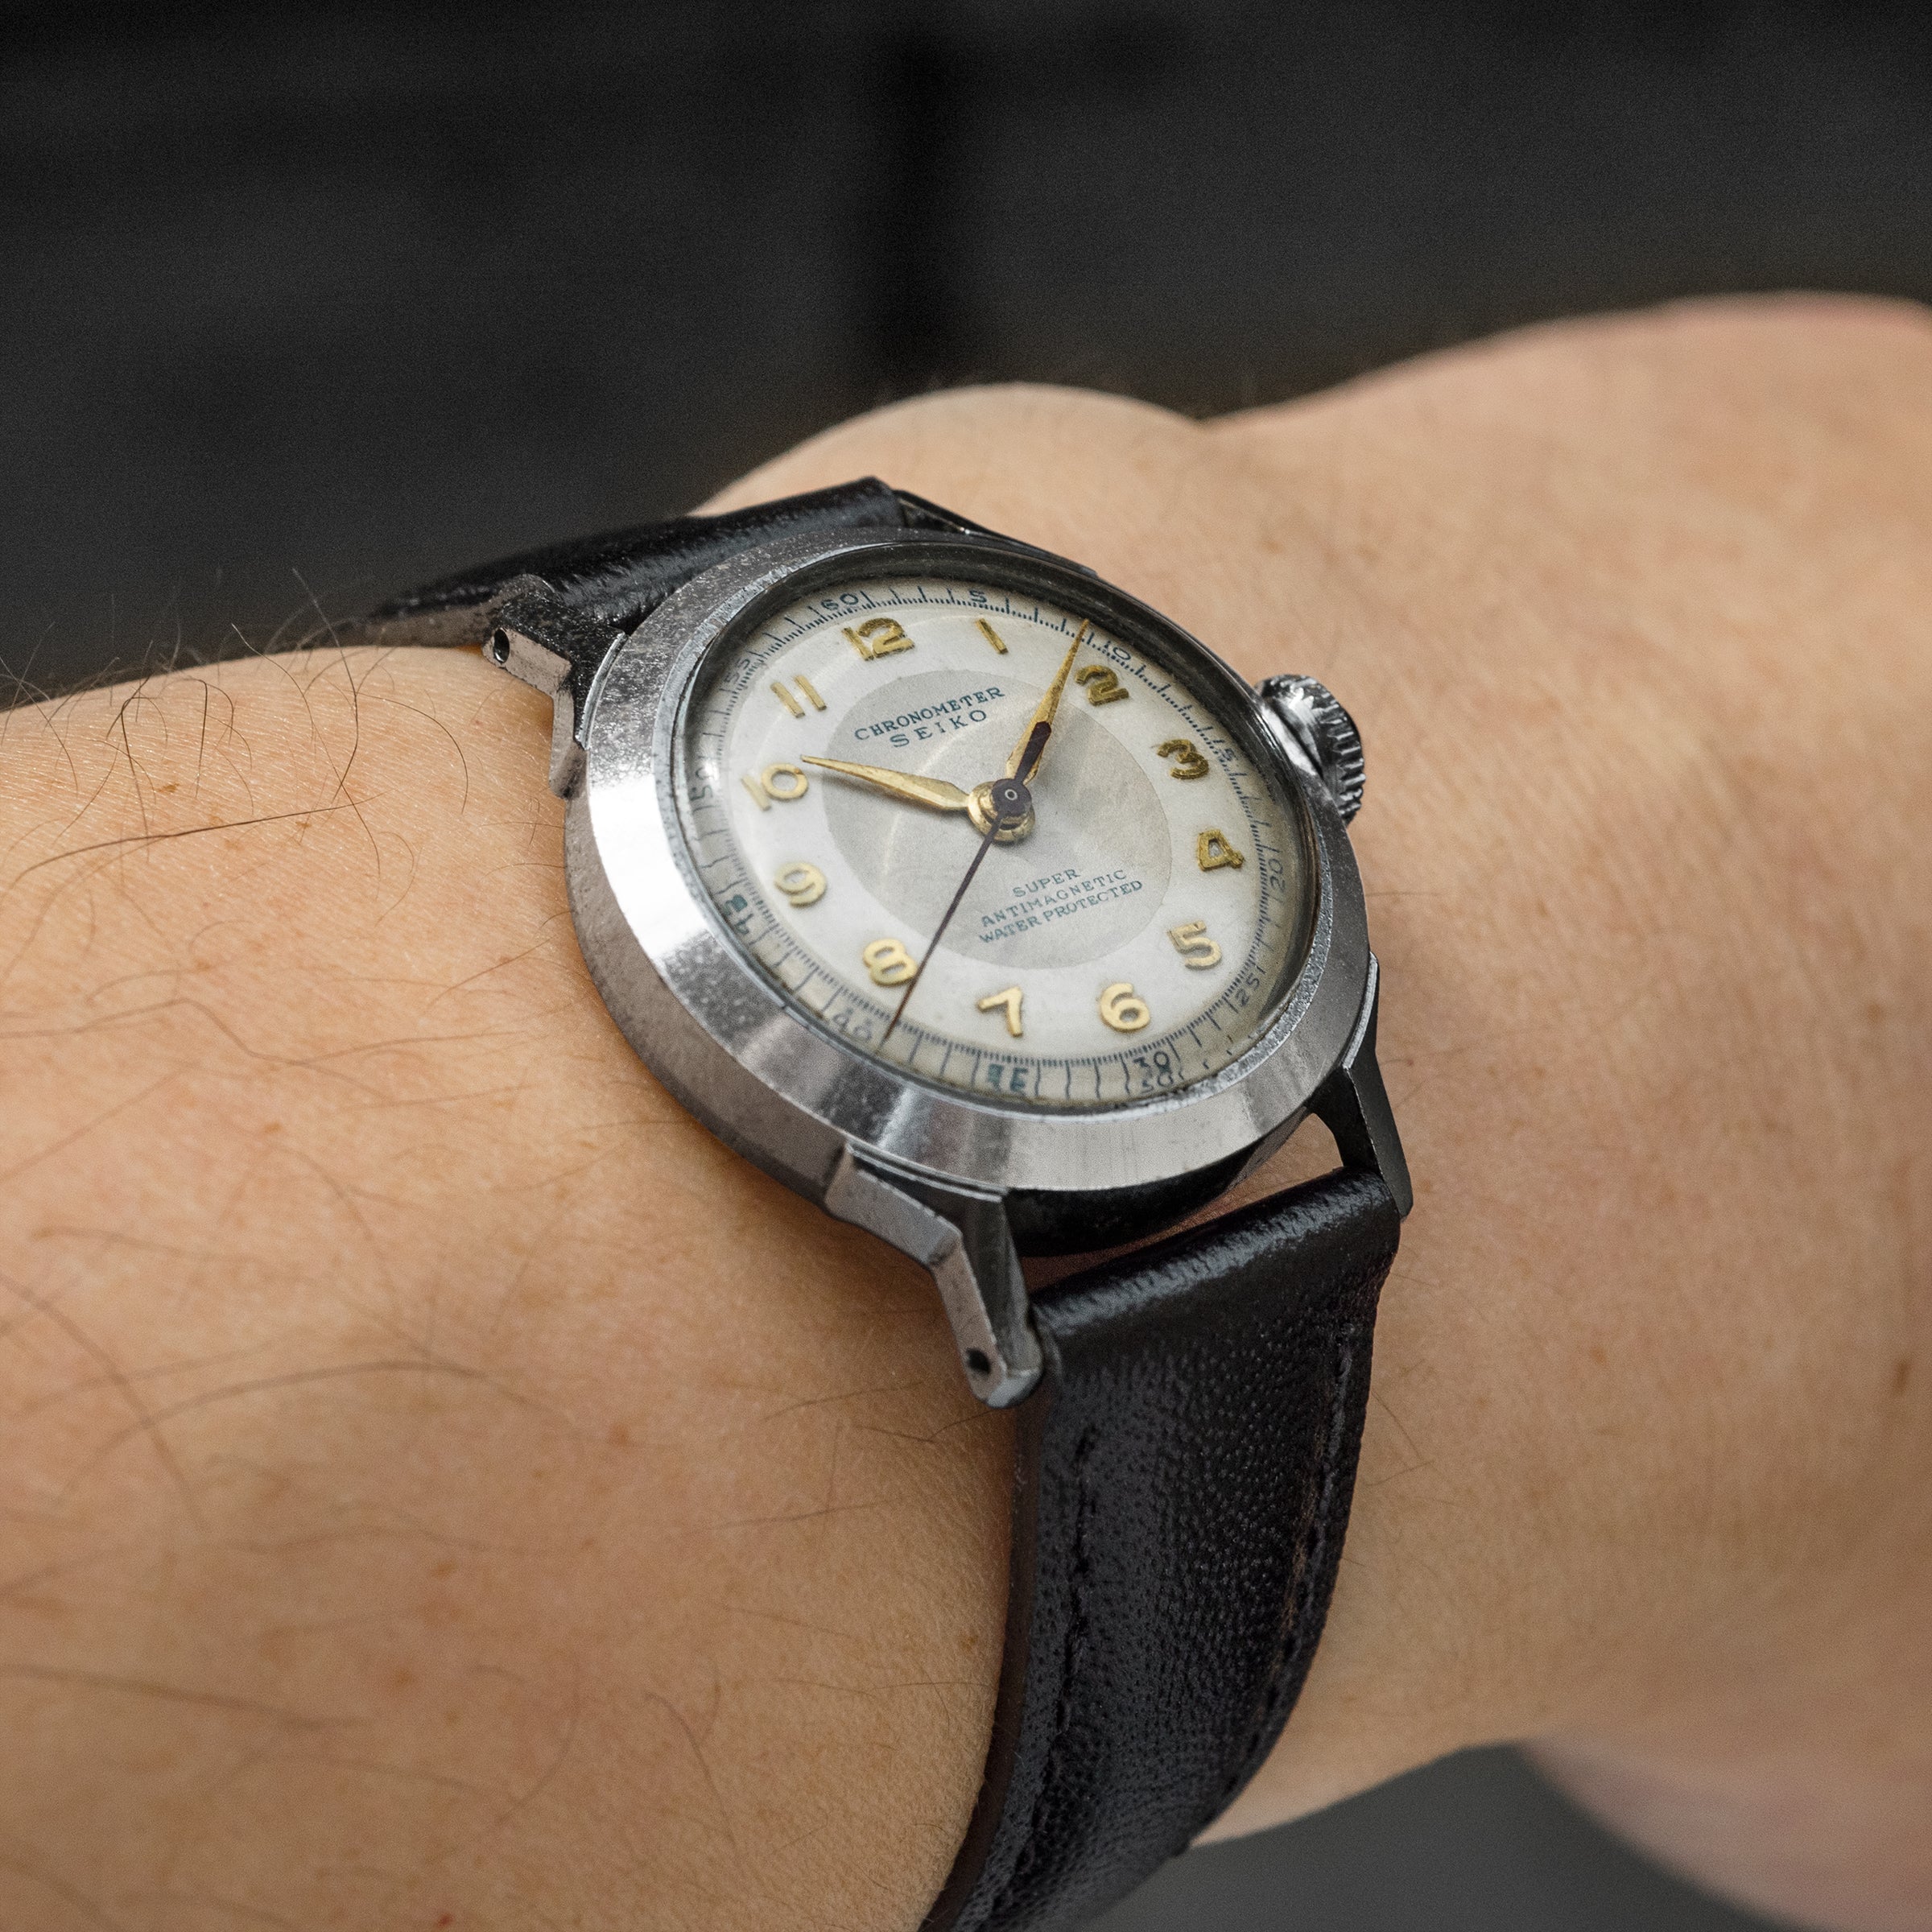 No. 474 / Seiko Super Chronometer - 1950s – From Time To Times